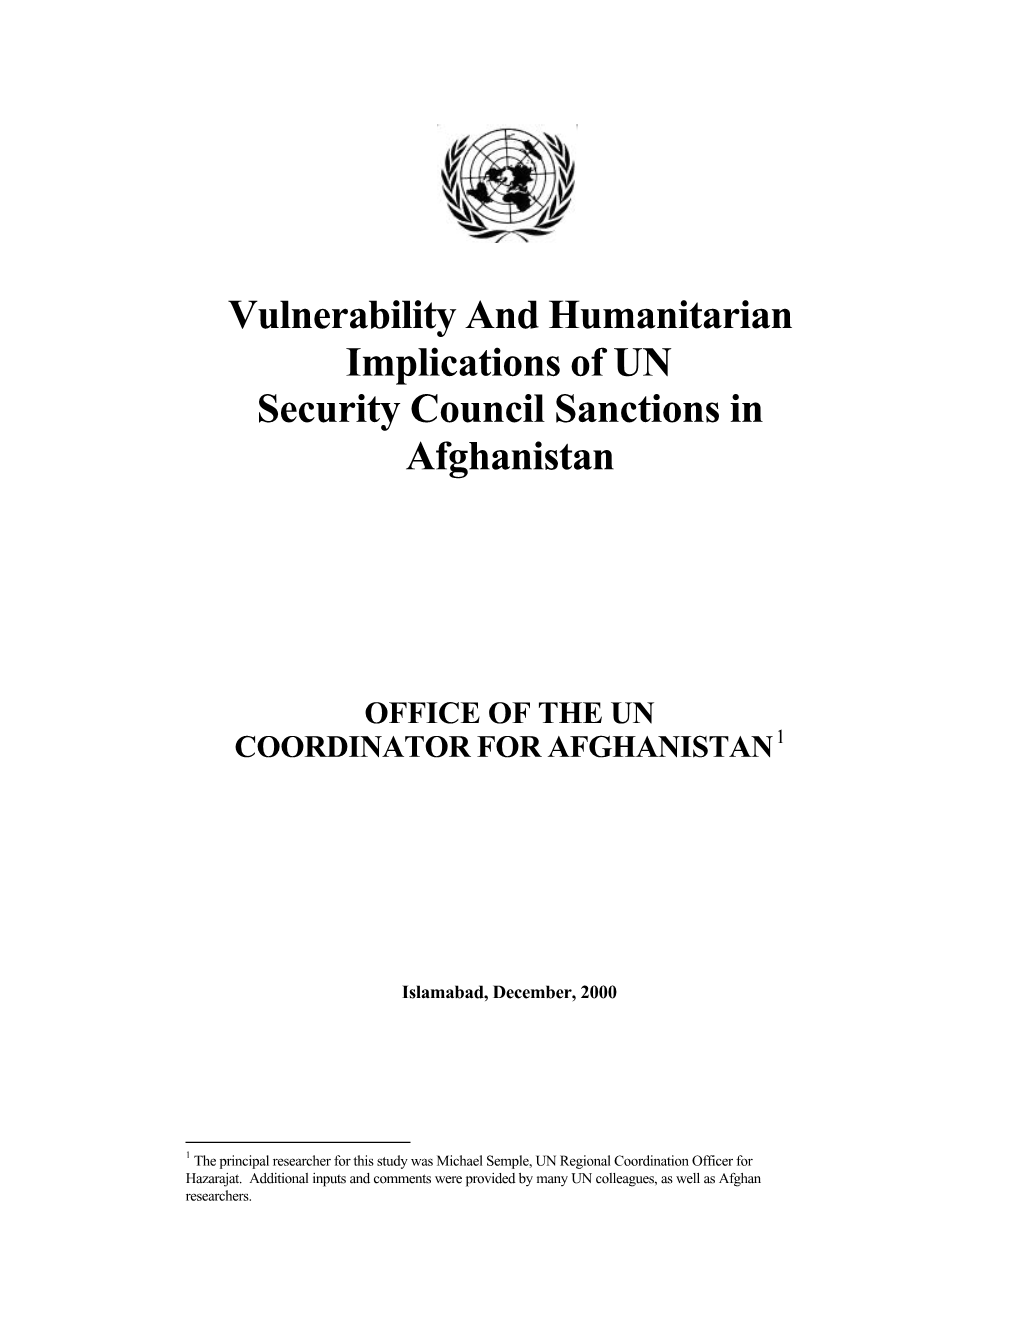 Vulnerability and Humanitarian Implications of UN Security Council Sanctions in Afghanistan